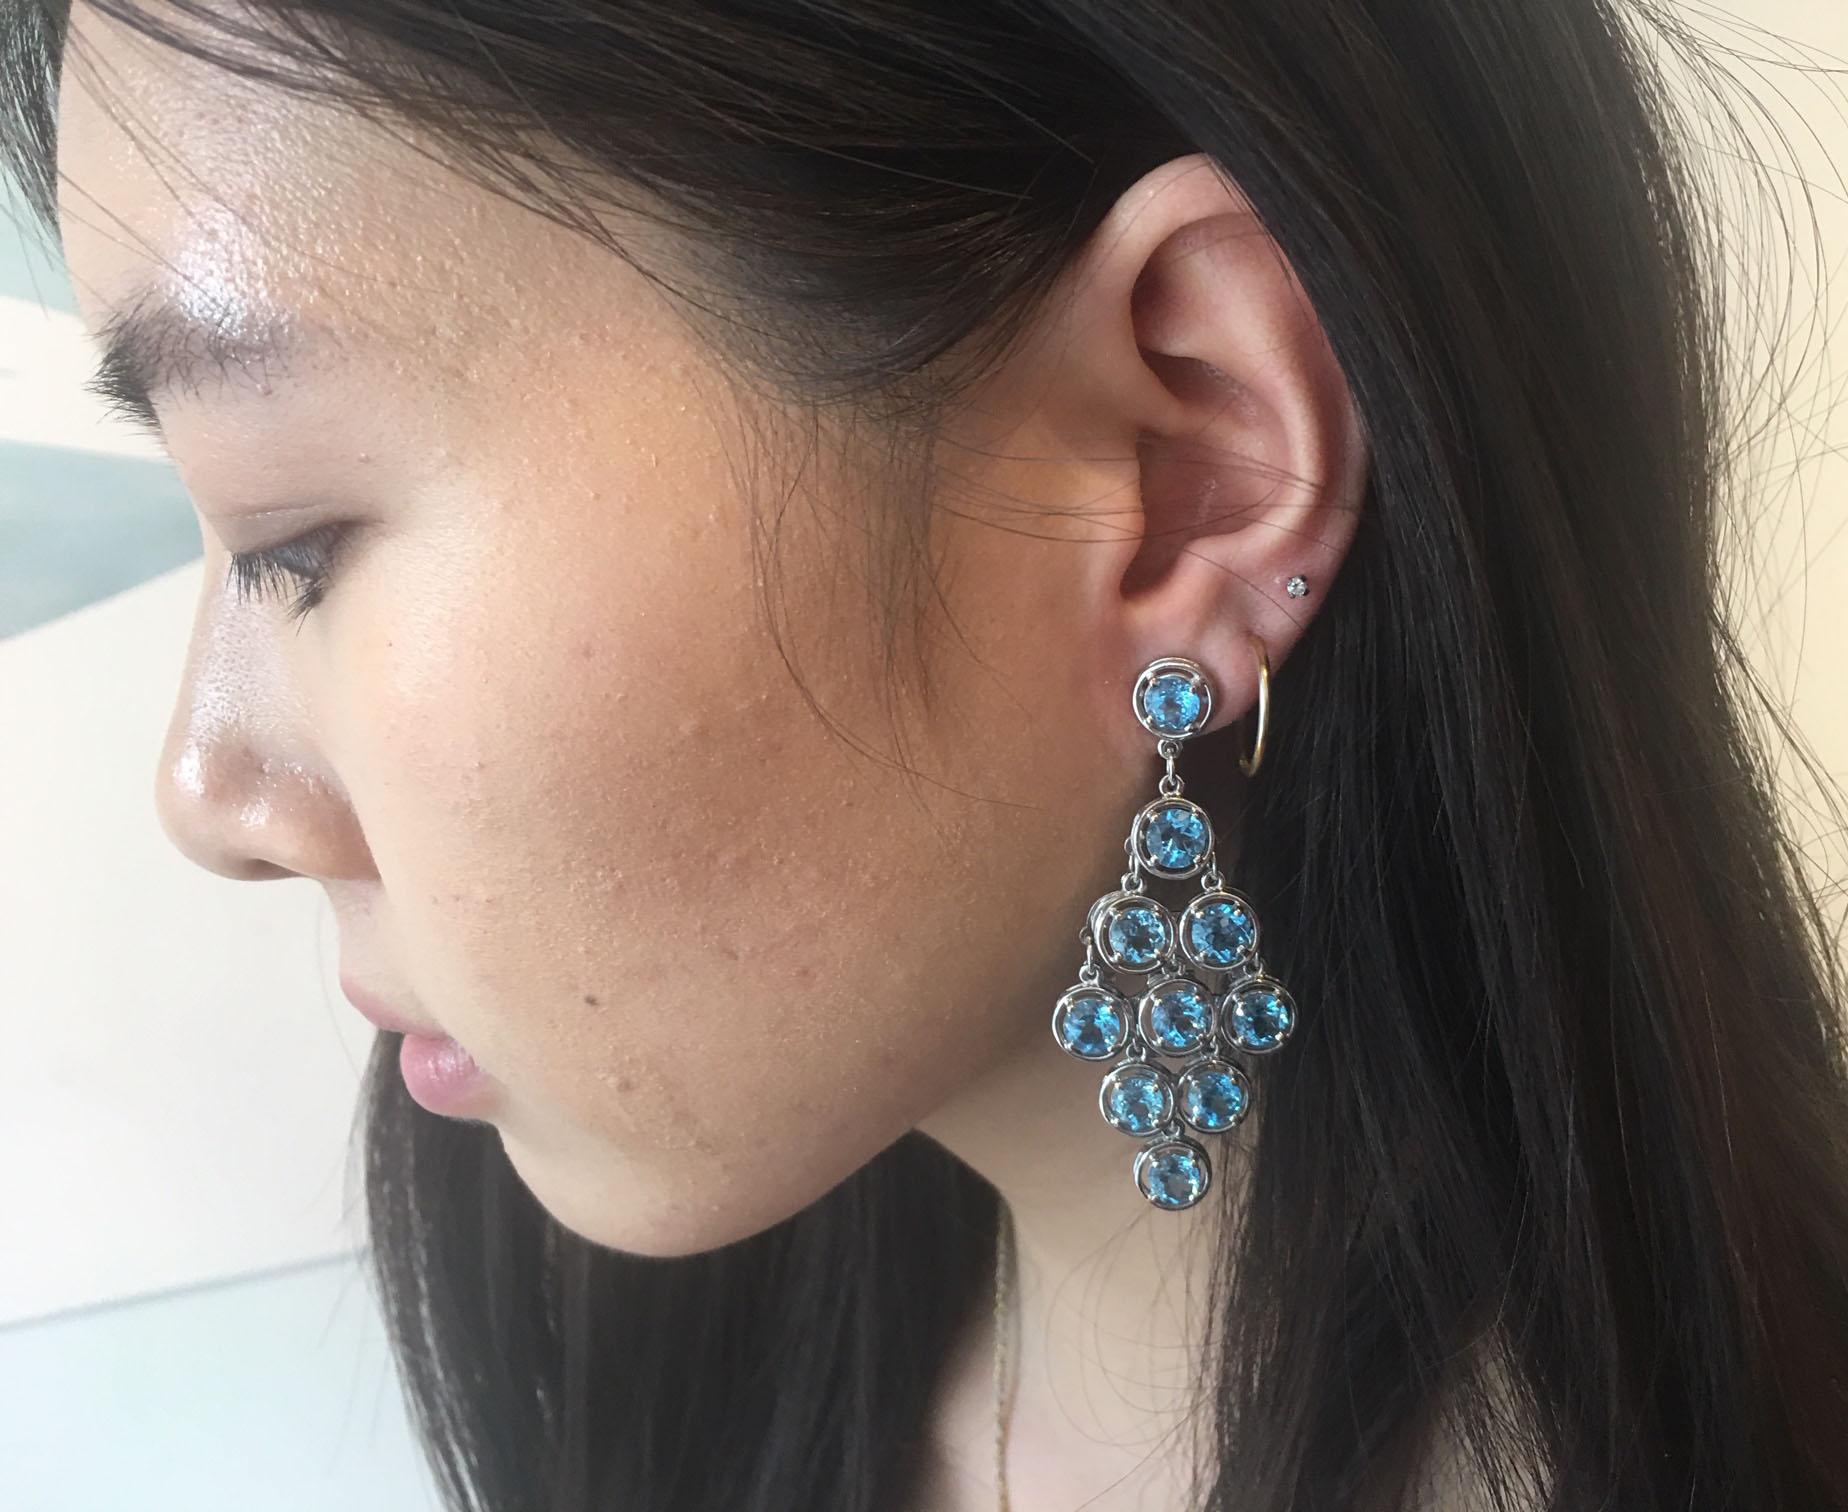 Sensational Chandelier Earrings set with twenty round faceted Blue Topaz mounted in 14k white gold handmade 4-claw setting with post and butterfly closure; A perfect complement to every wardrobe… Illuminating your Look with a touch of class!
